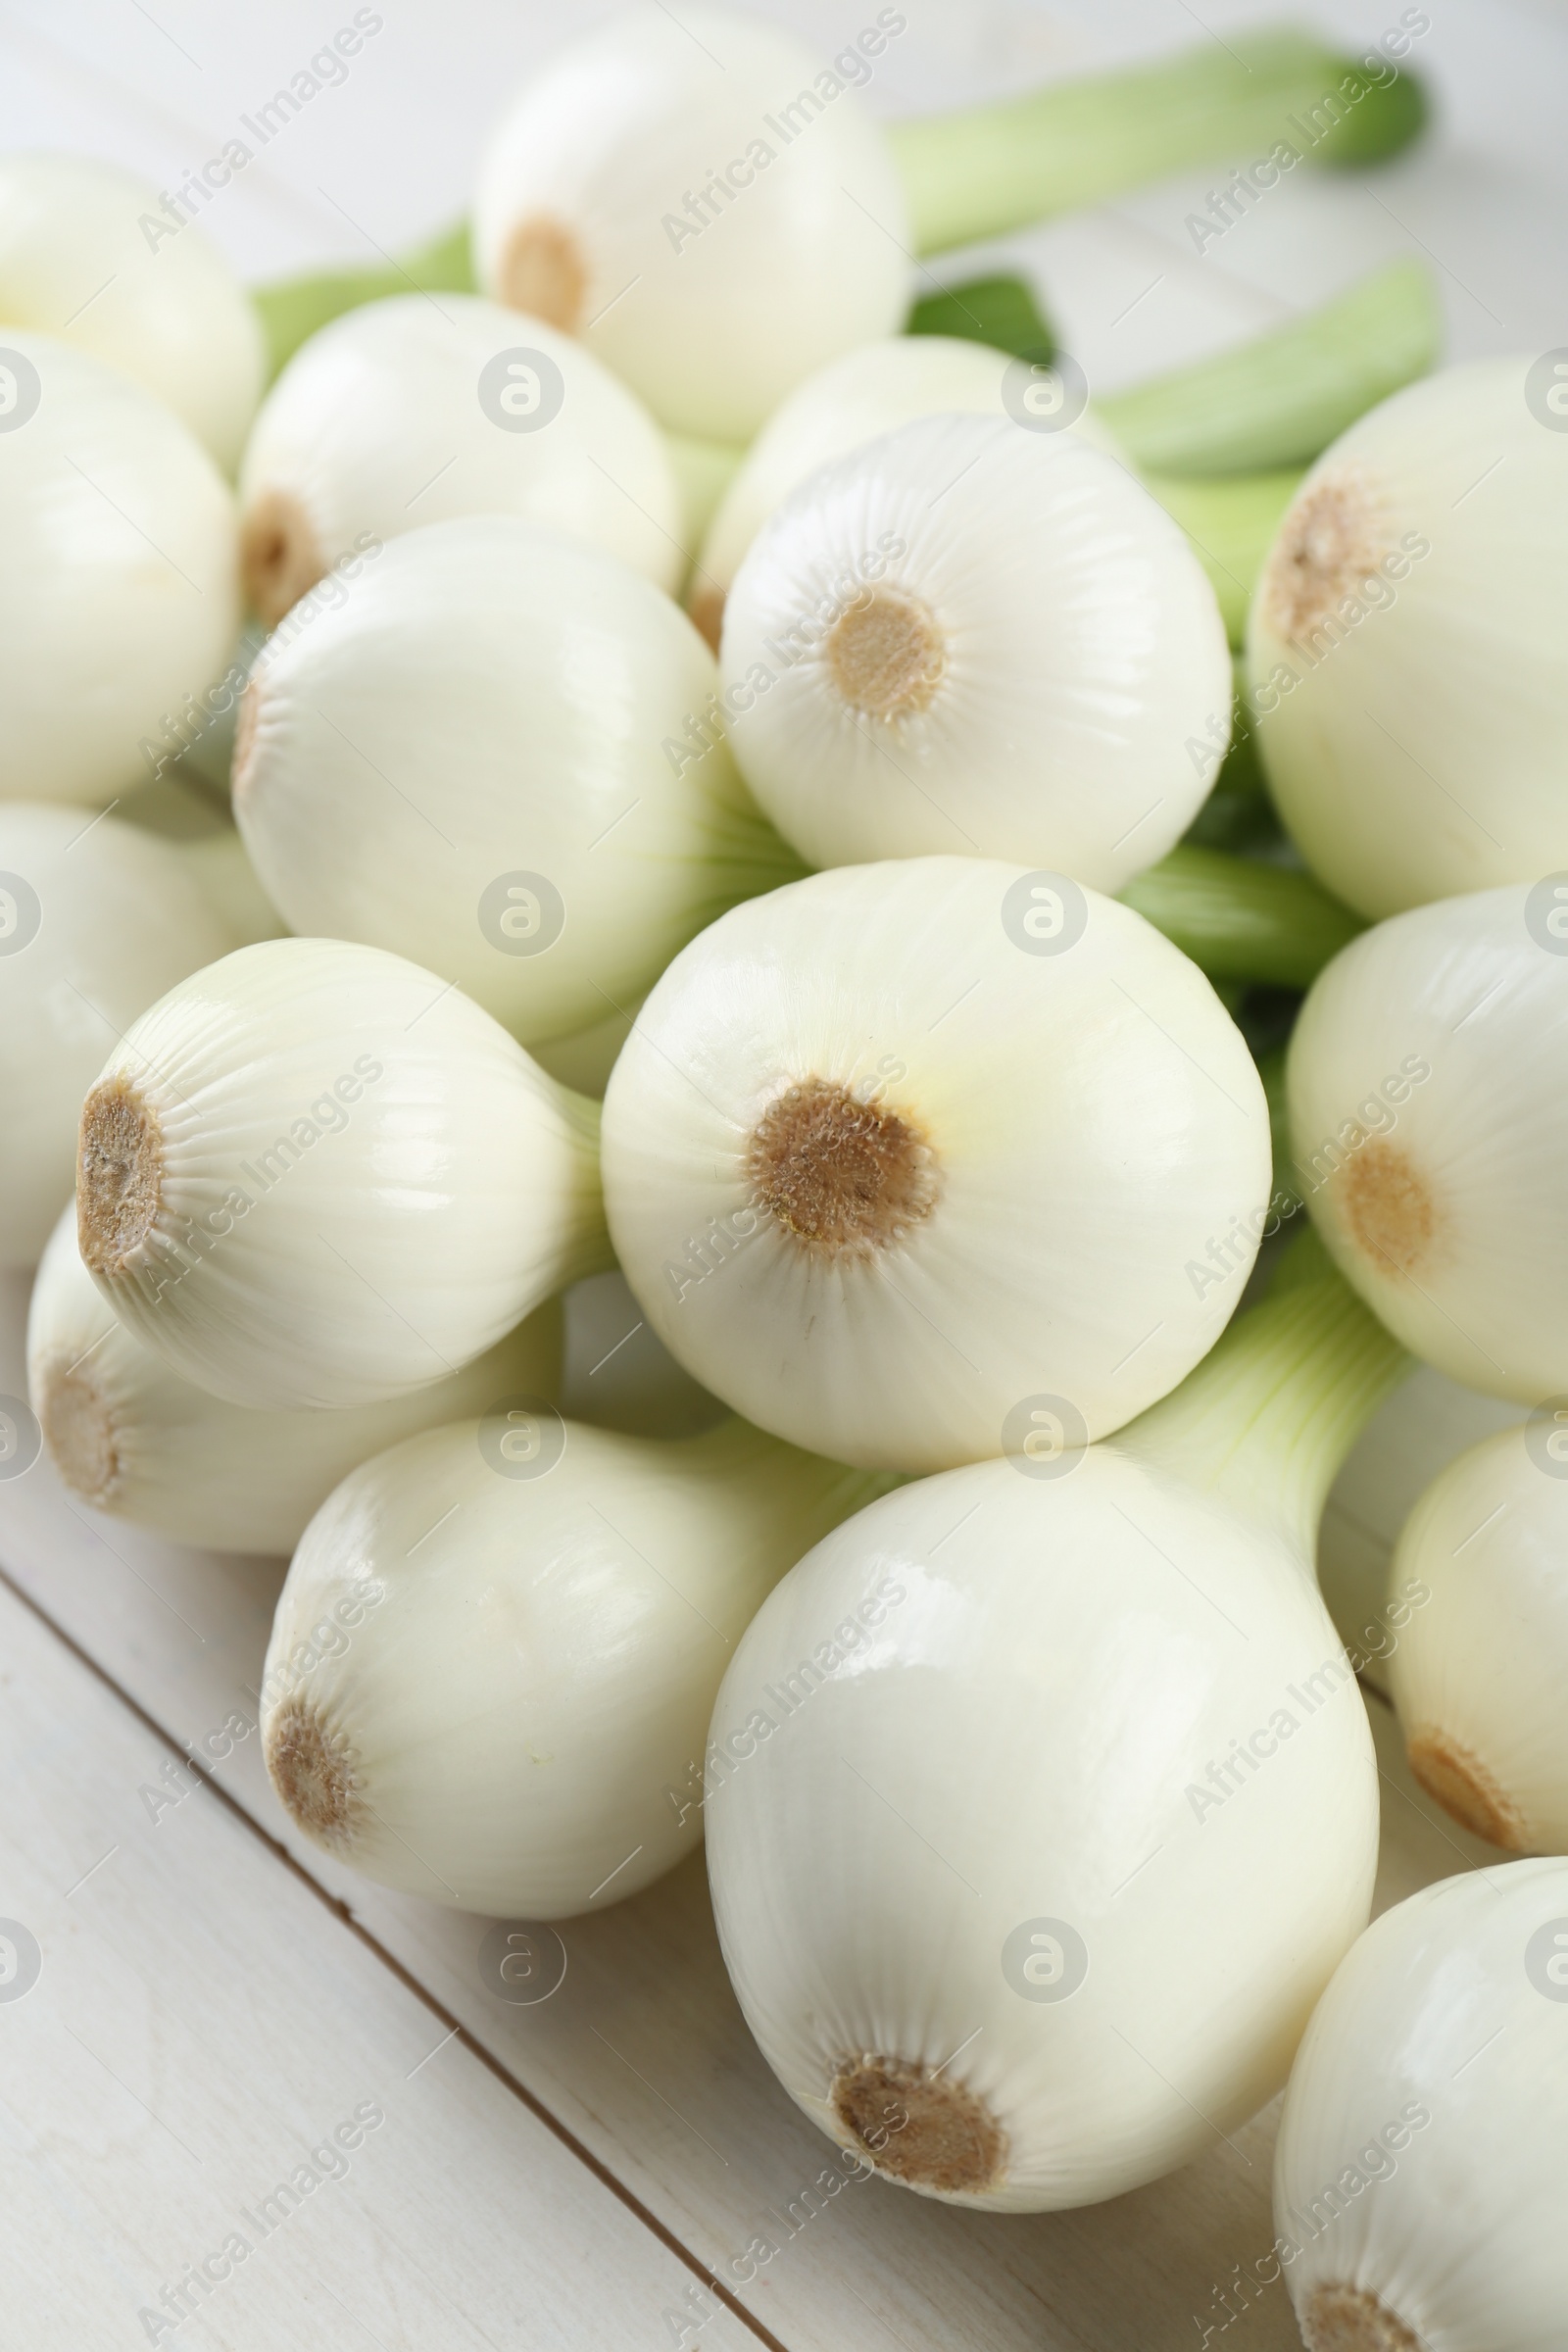 Photo of Whole green spring onions on white wooden table, closeup